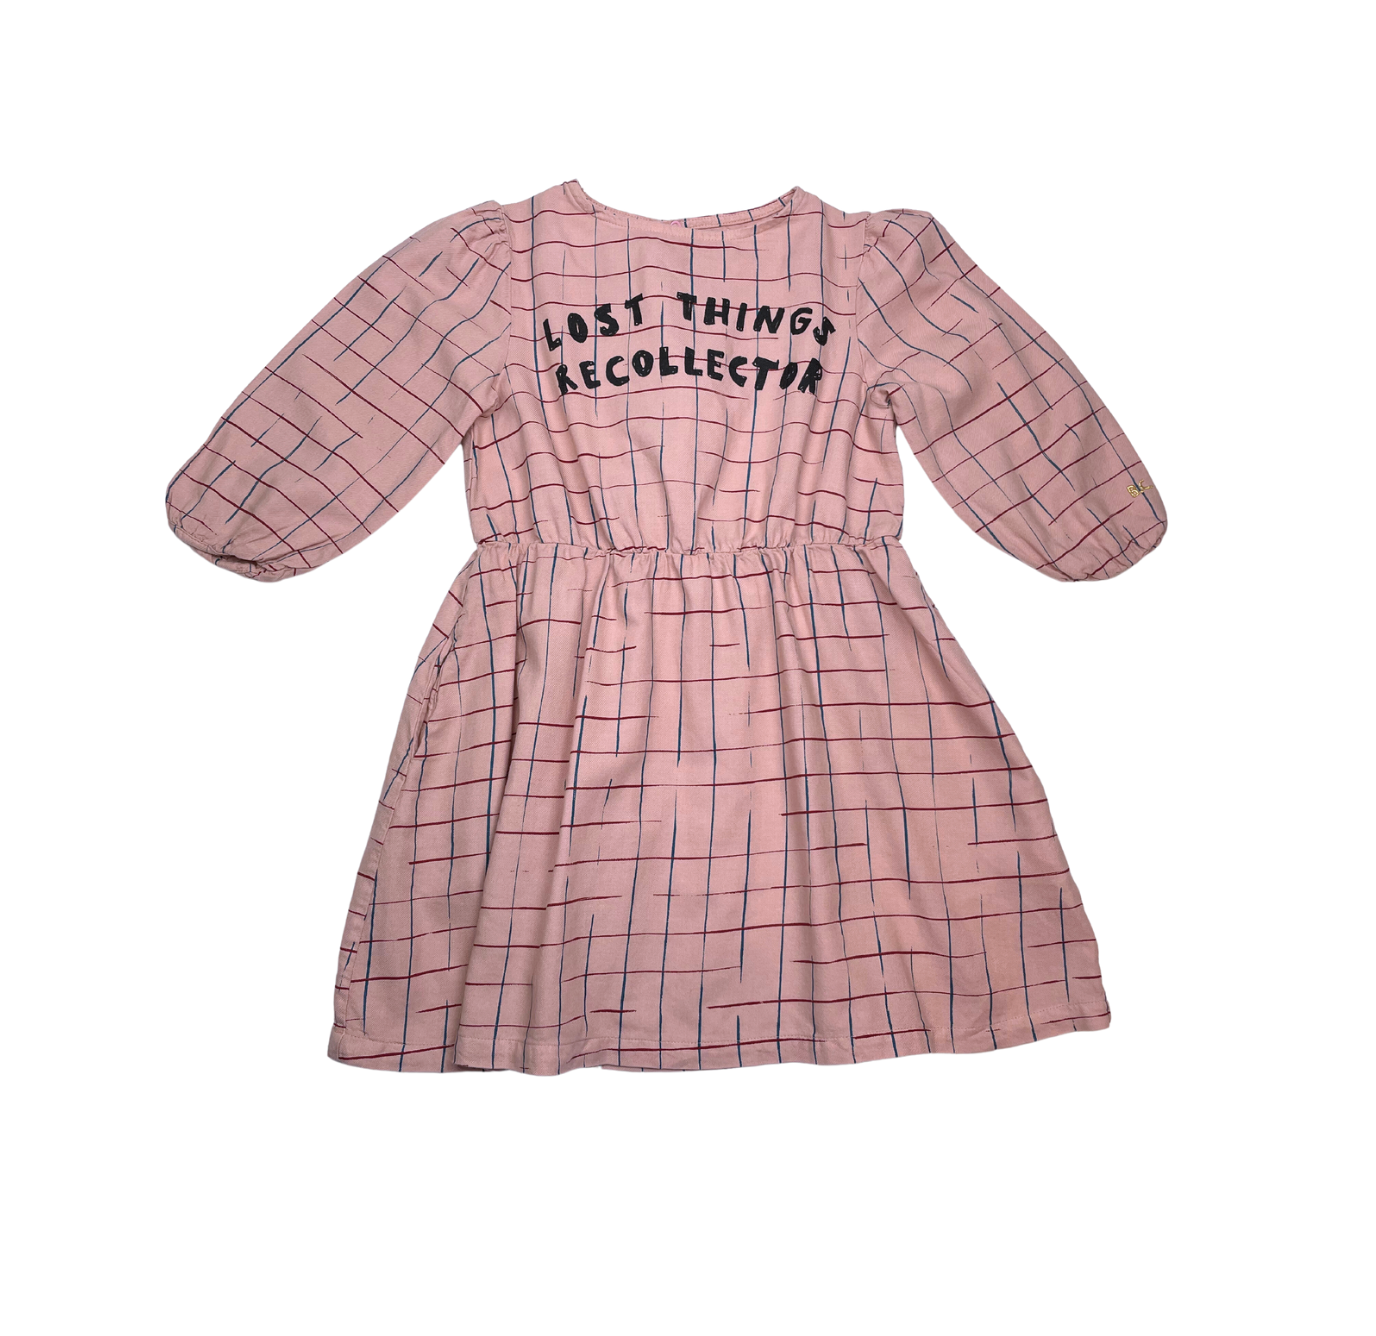 BOBO CHOSES - Robe rose à carreaux "lost things recollector" - 2/3 ans